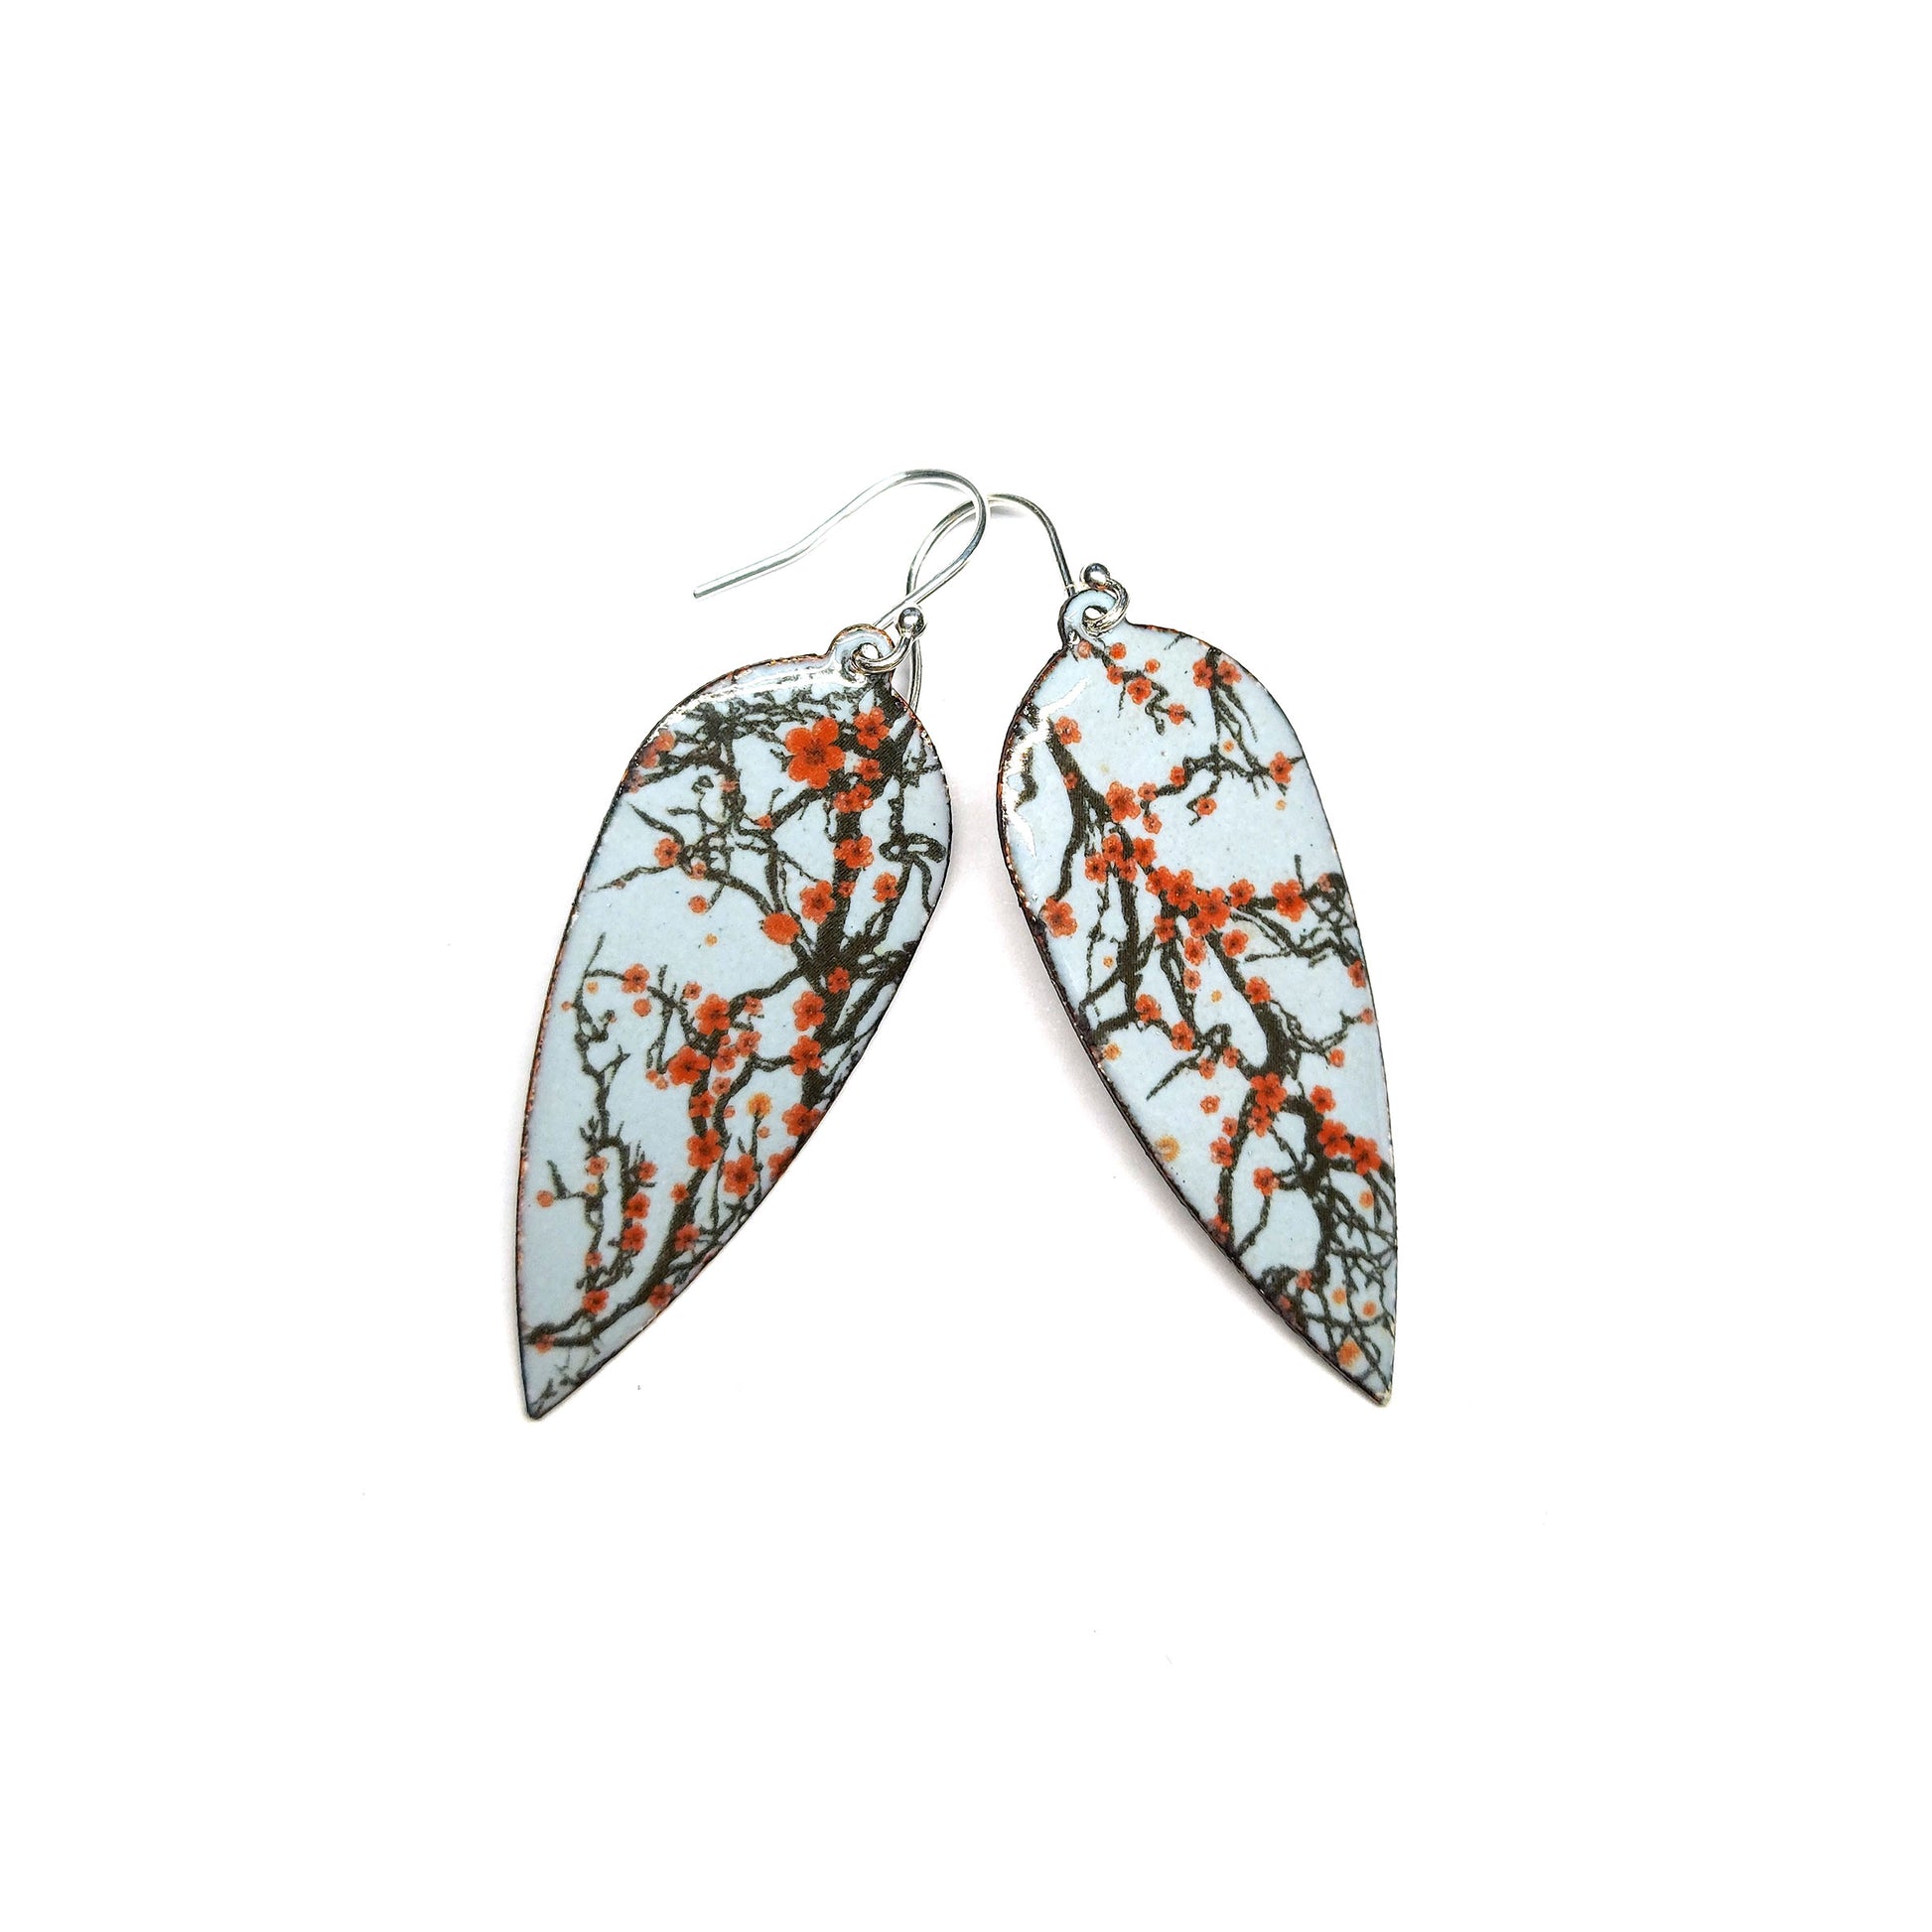 Statement enamel earrings featuring branches and red cherry blossom. On silver ear hooks. 